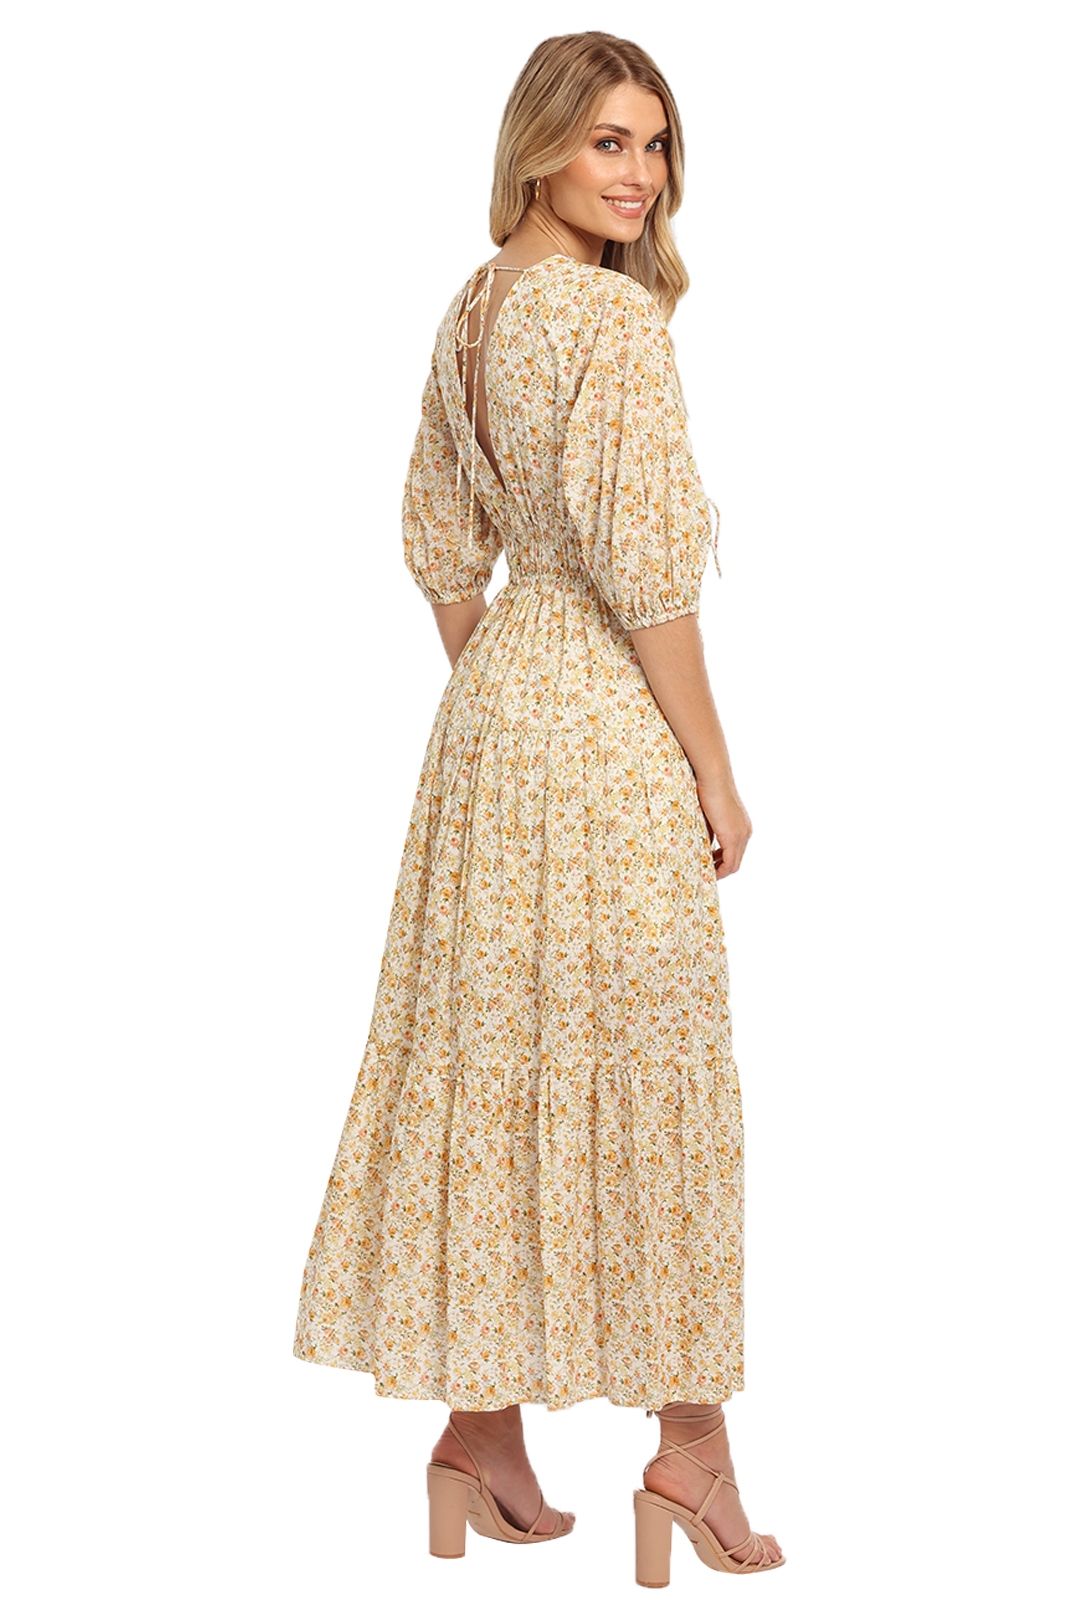 Significant Other Adele Dress Maxi